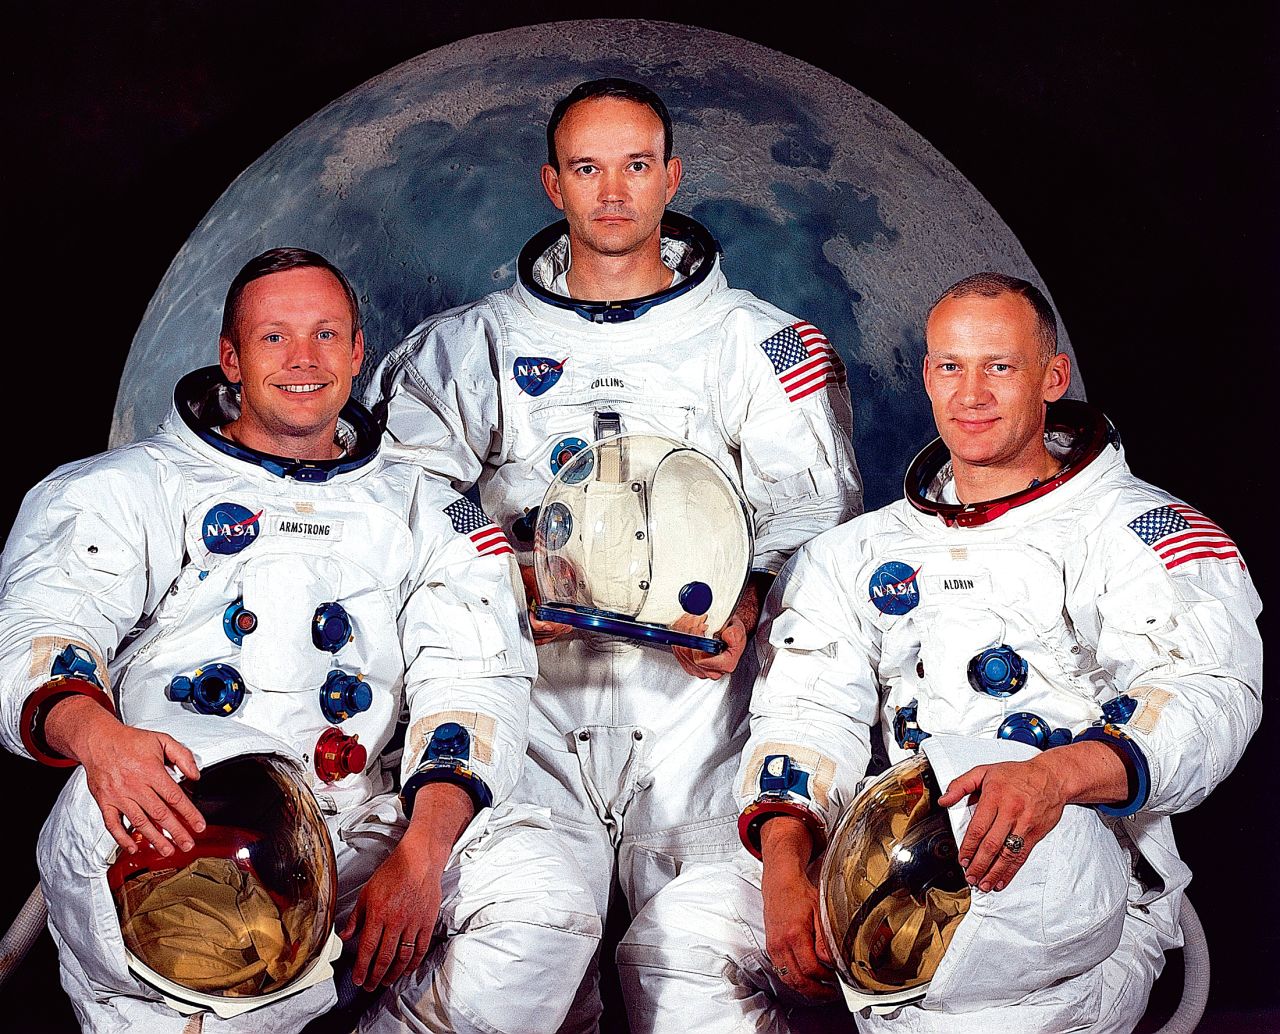 The astronaut crew of the Apollo 11 mission are pictured in May 1969. Left to right are Neil Armstrong, commander; Michael Collins, command module pilot; and Edwin 'Buzz'  Aldrin, lunar module pilot.